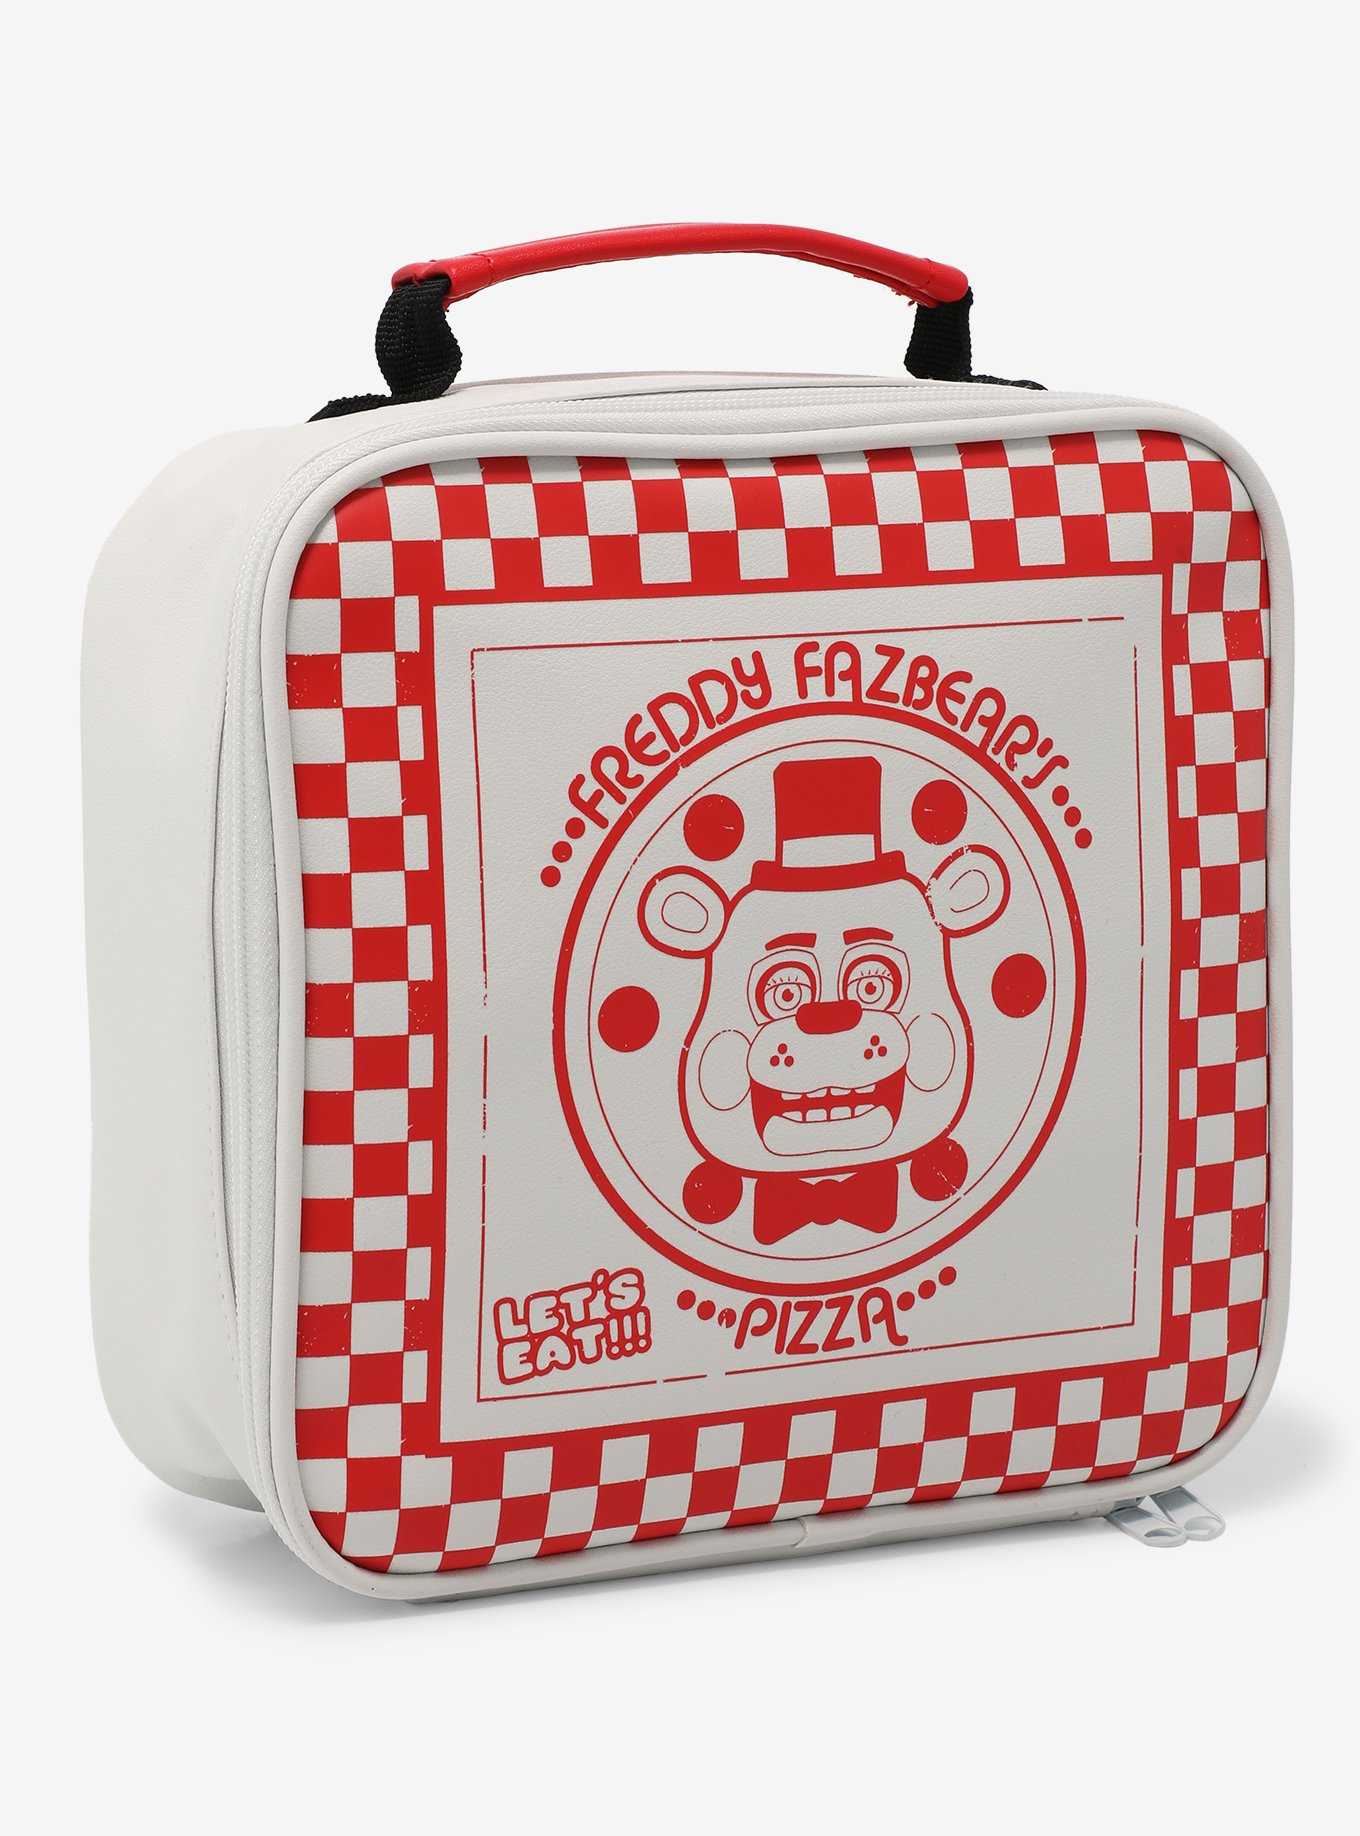 Five Nights At Freddy's Pizza Box Lunch Bag Hot Topic Exclusive, , hi-res